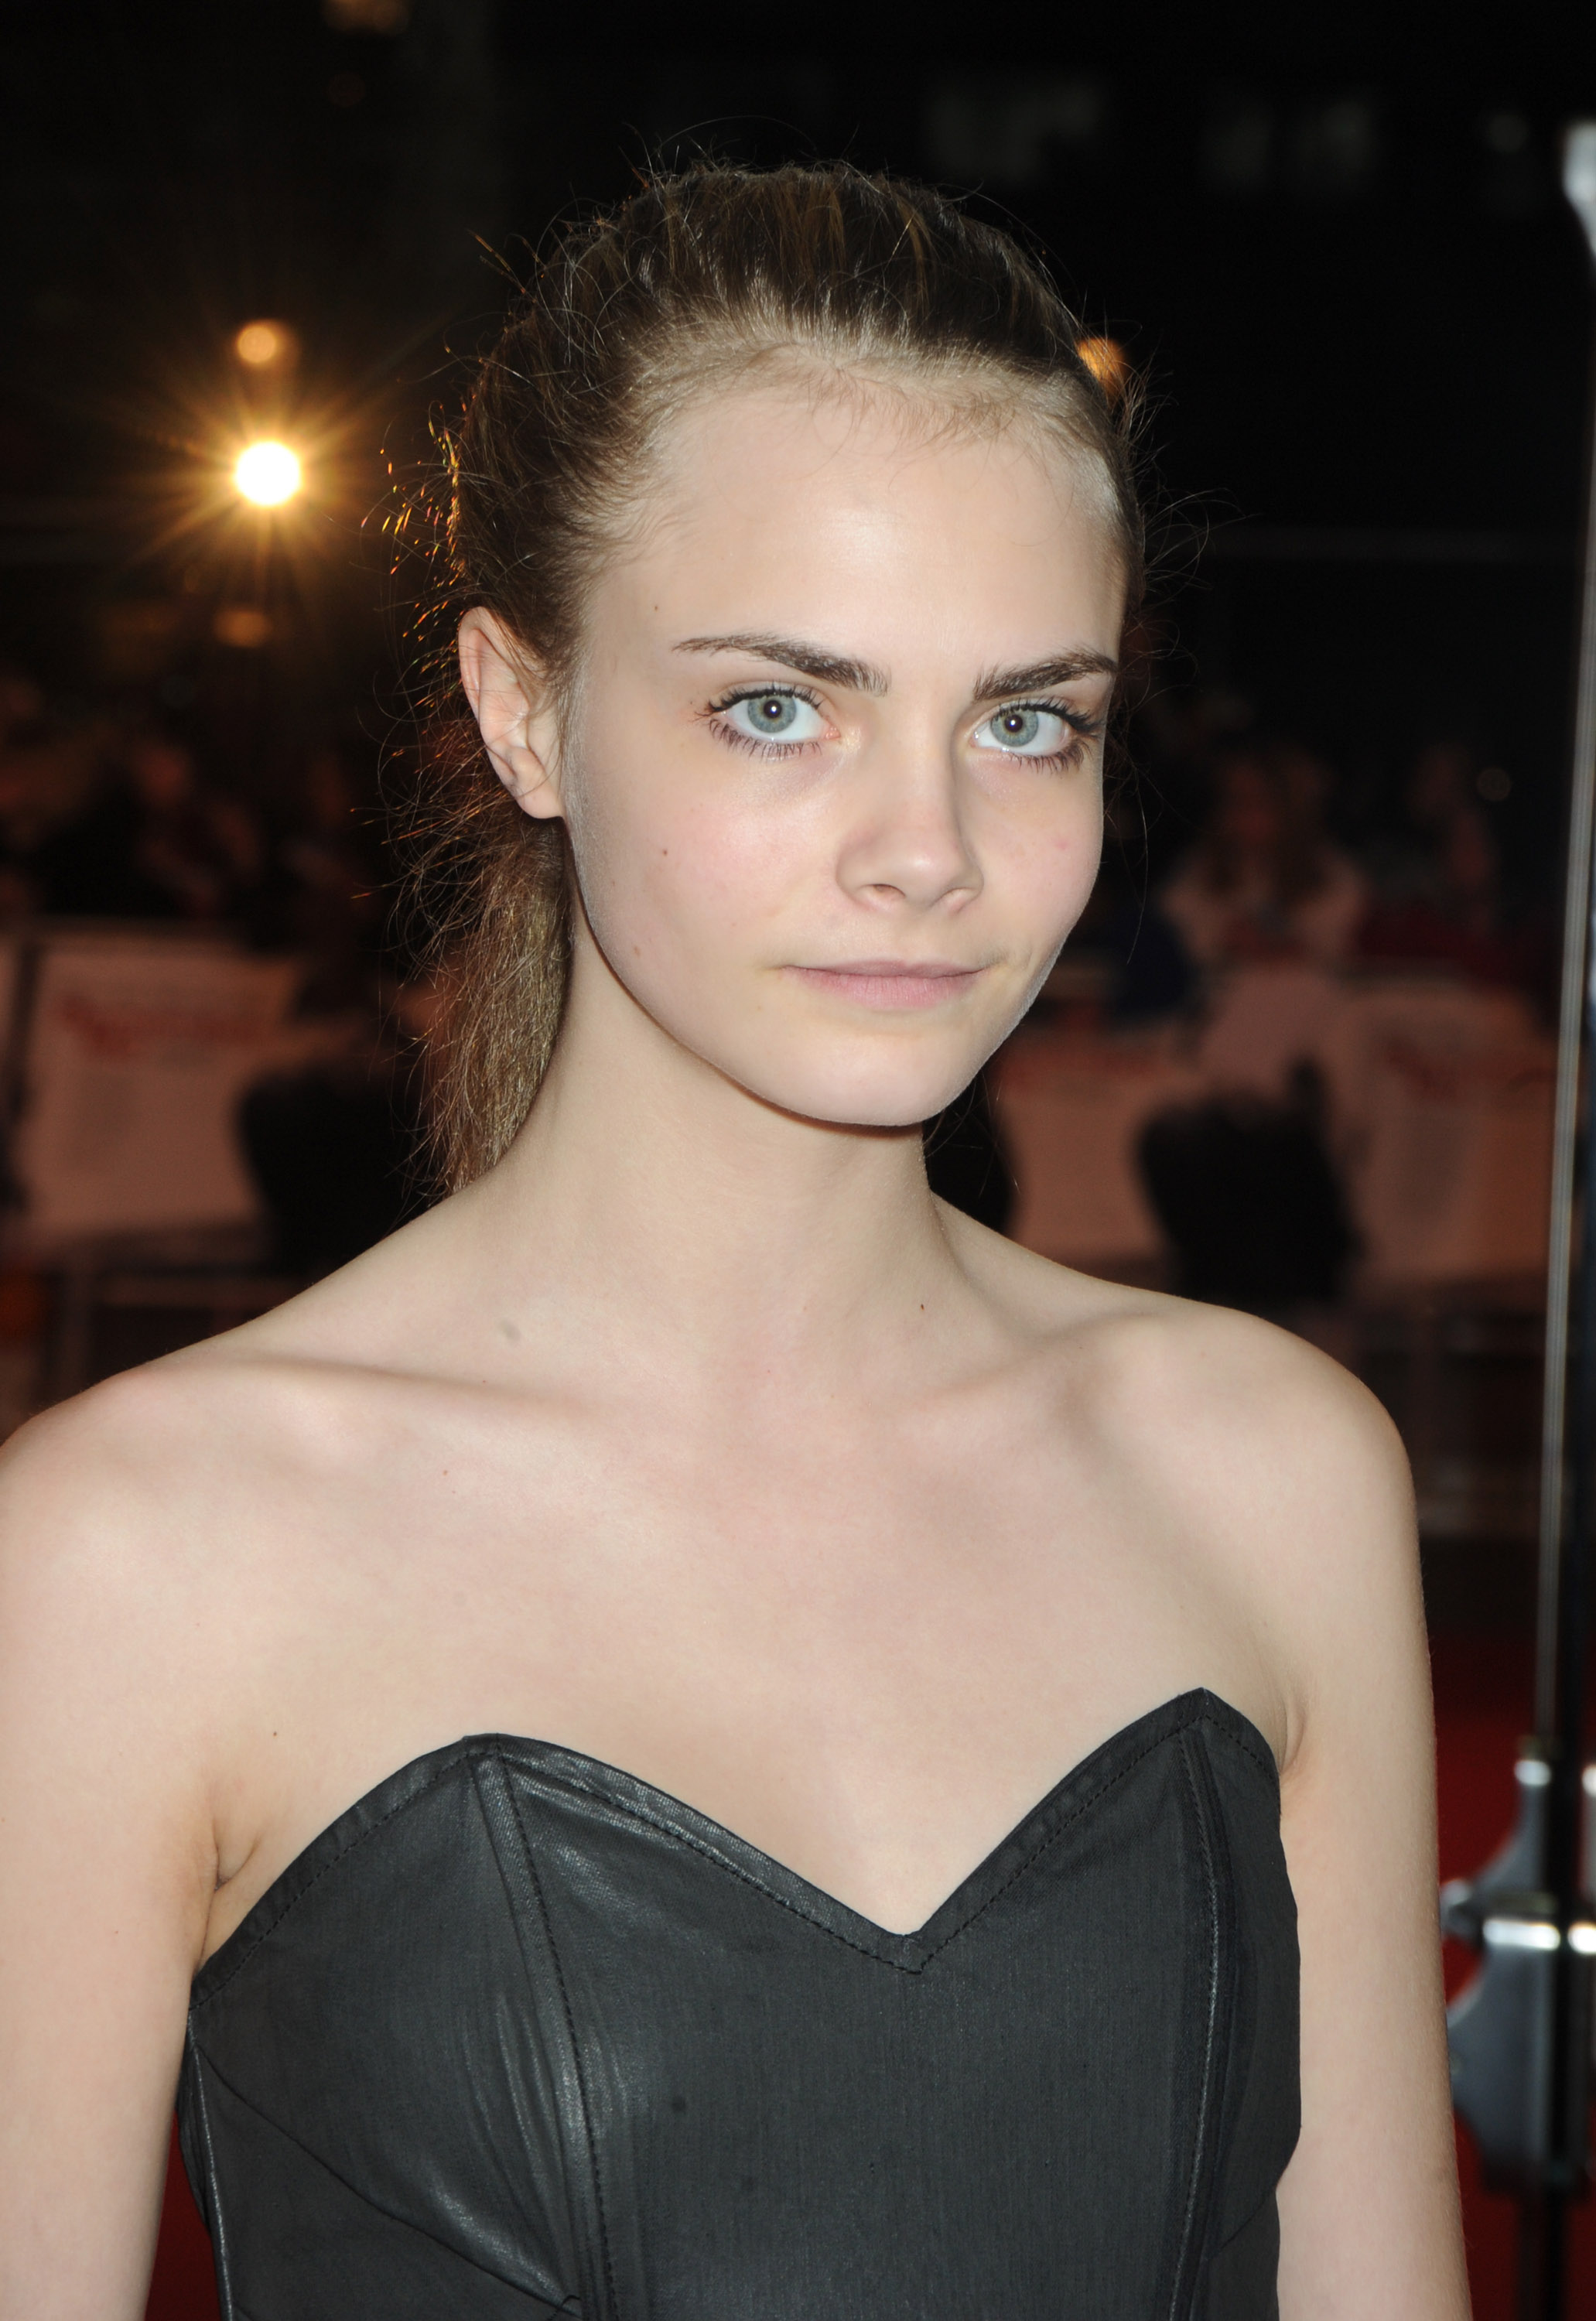 Cara Delevingne on March 17, 2010 | Source: Getty Images